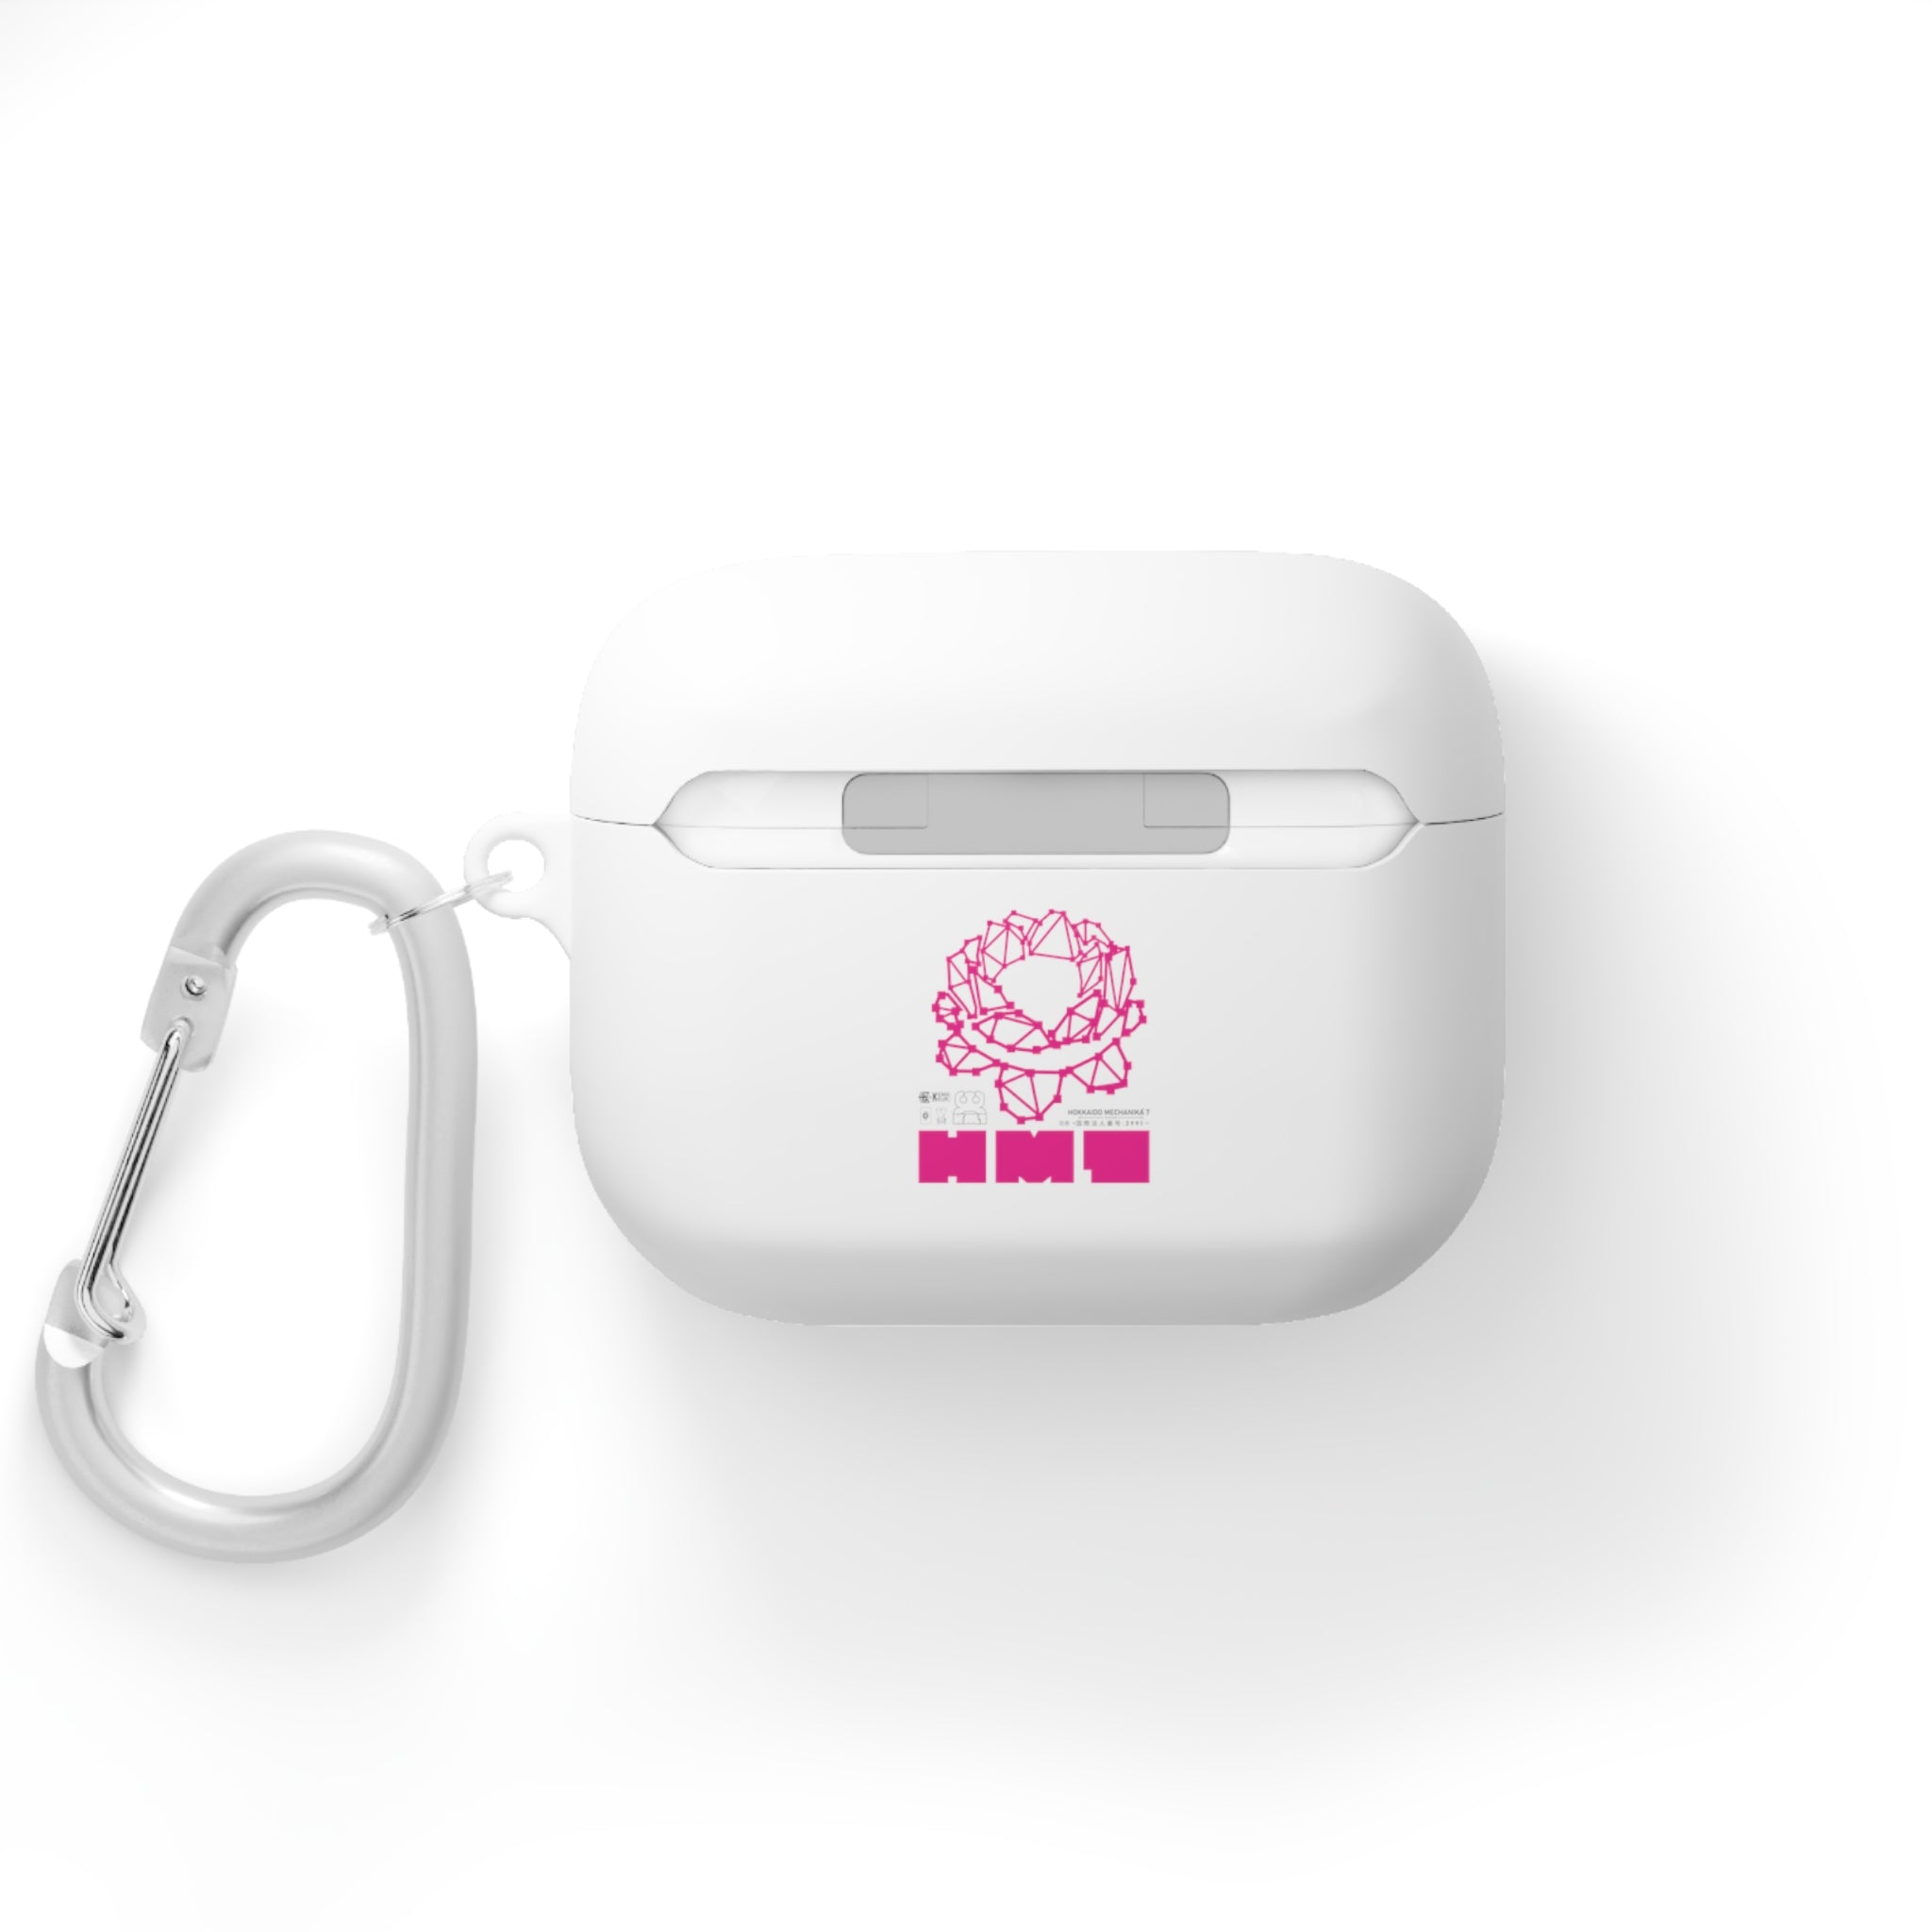 PINKFLOWER AirPods Pro Case Cover